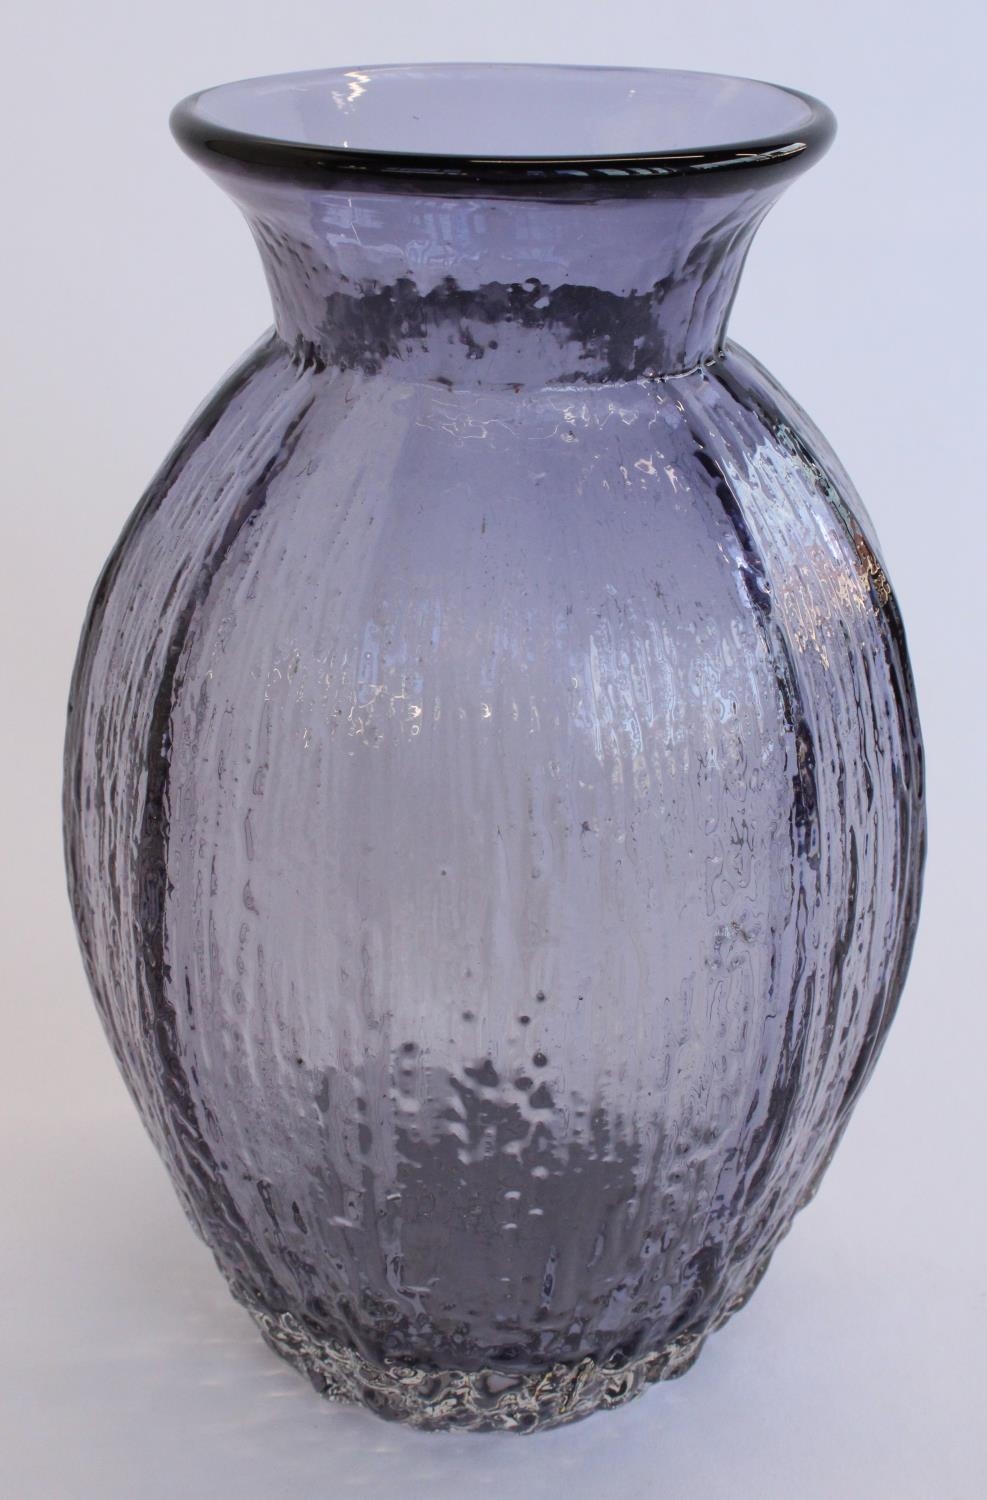 Whitefriars 'large Tulip' 9826 textured glass vase in lilac colourway as designed by Geoffrey Baxter